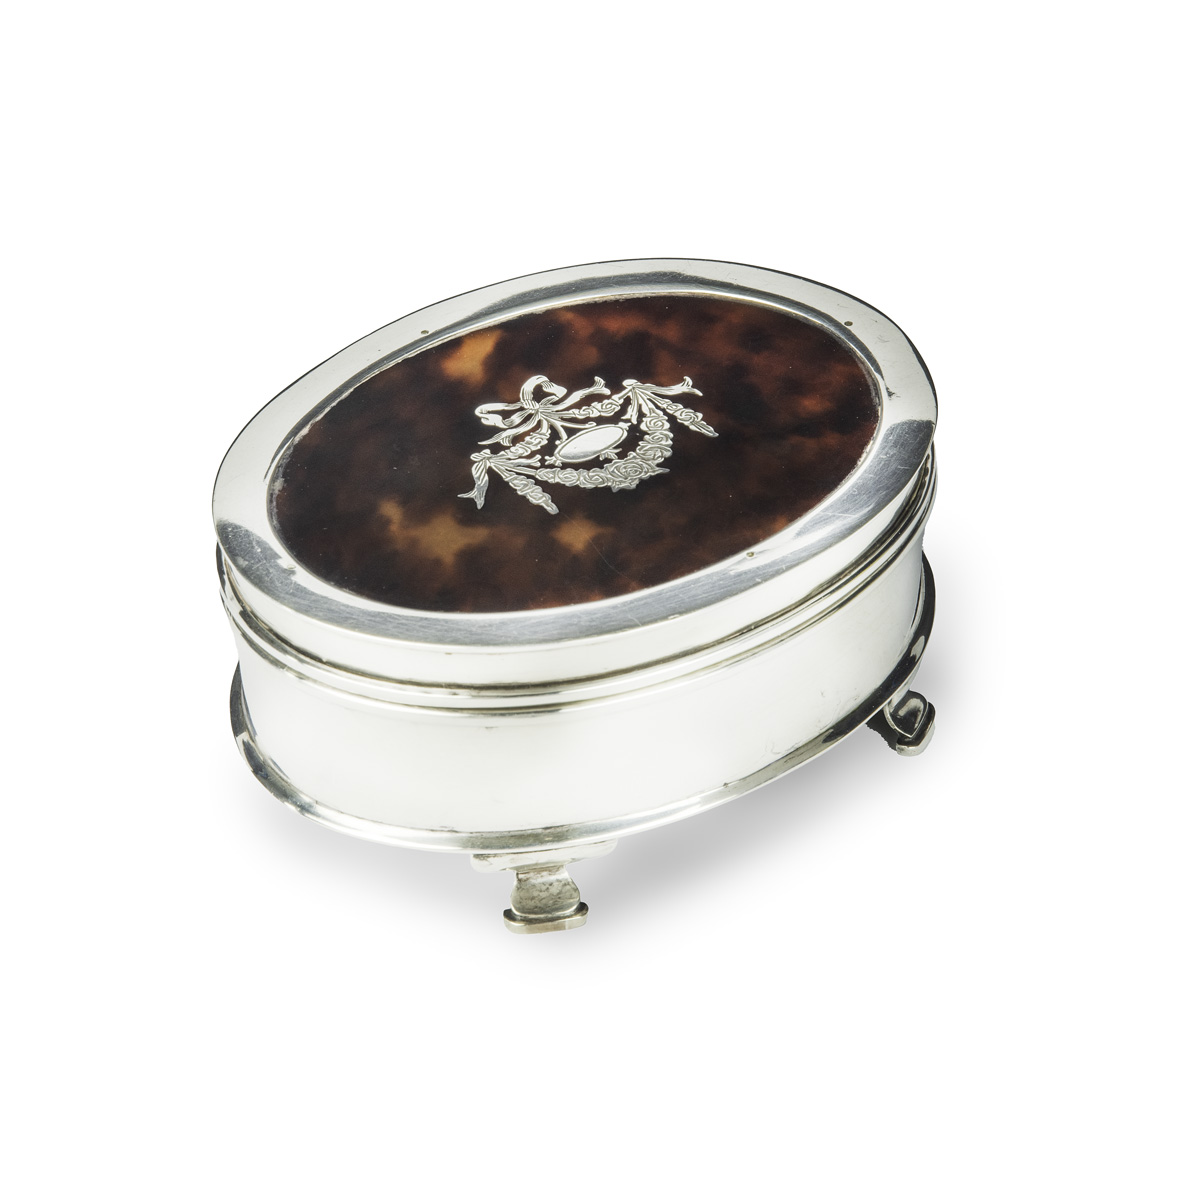 A small oval tortoiseshell piqué patch pot, the hinged lid with a beribboned garland of flowers round a blank escutcheon, raised on four ogee feet. English, assay marks C&A, London, 1919.